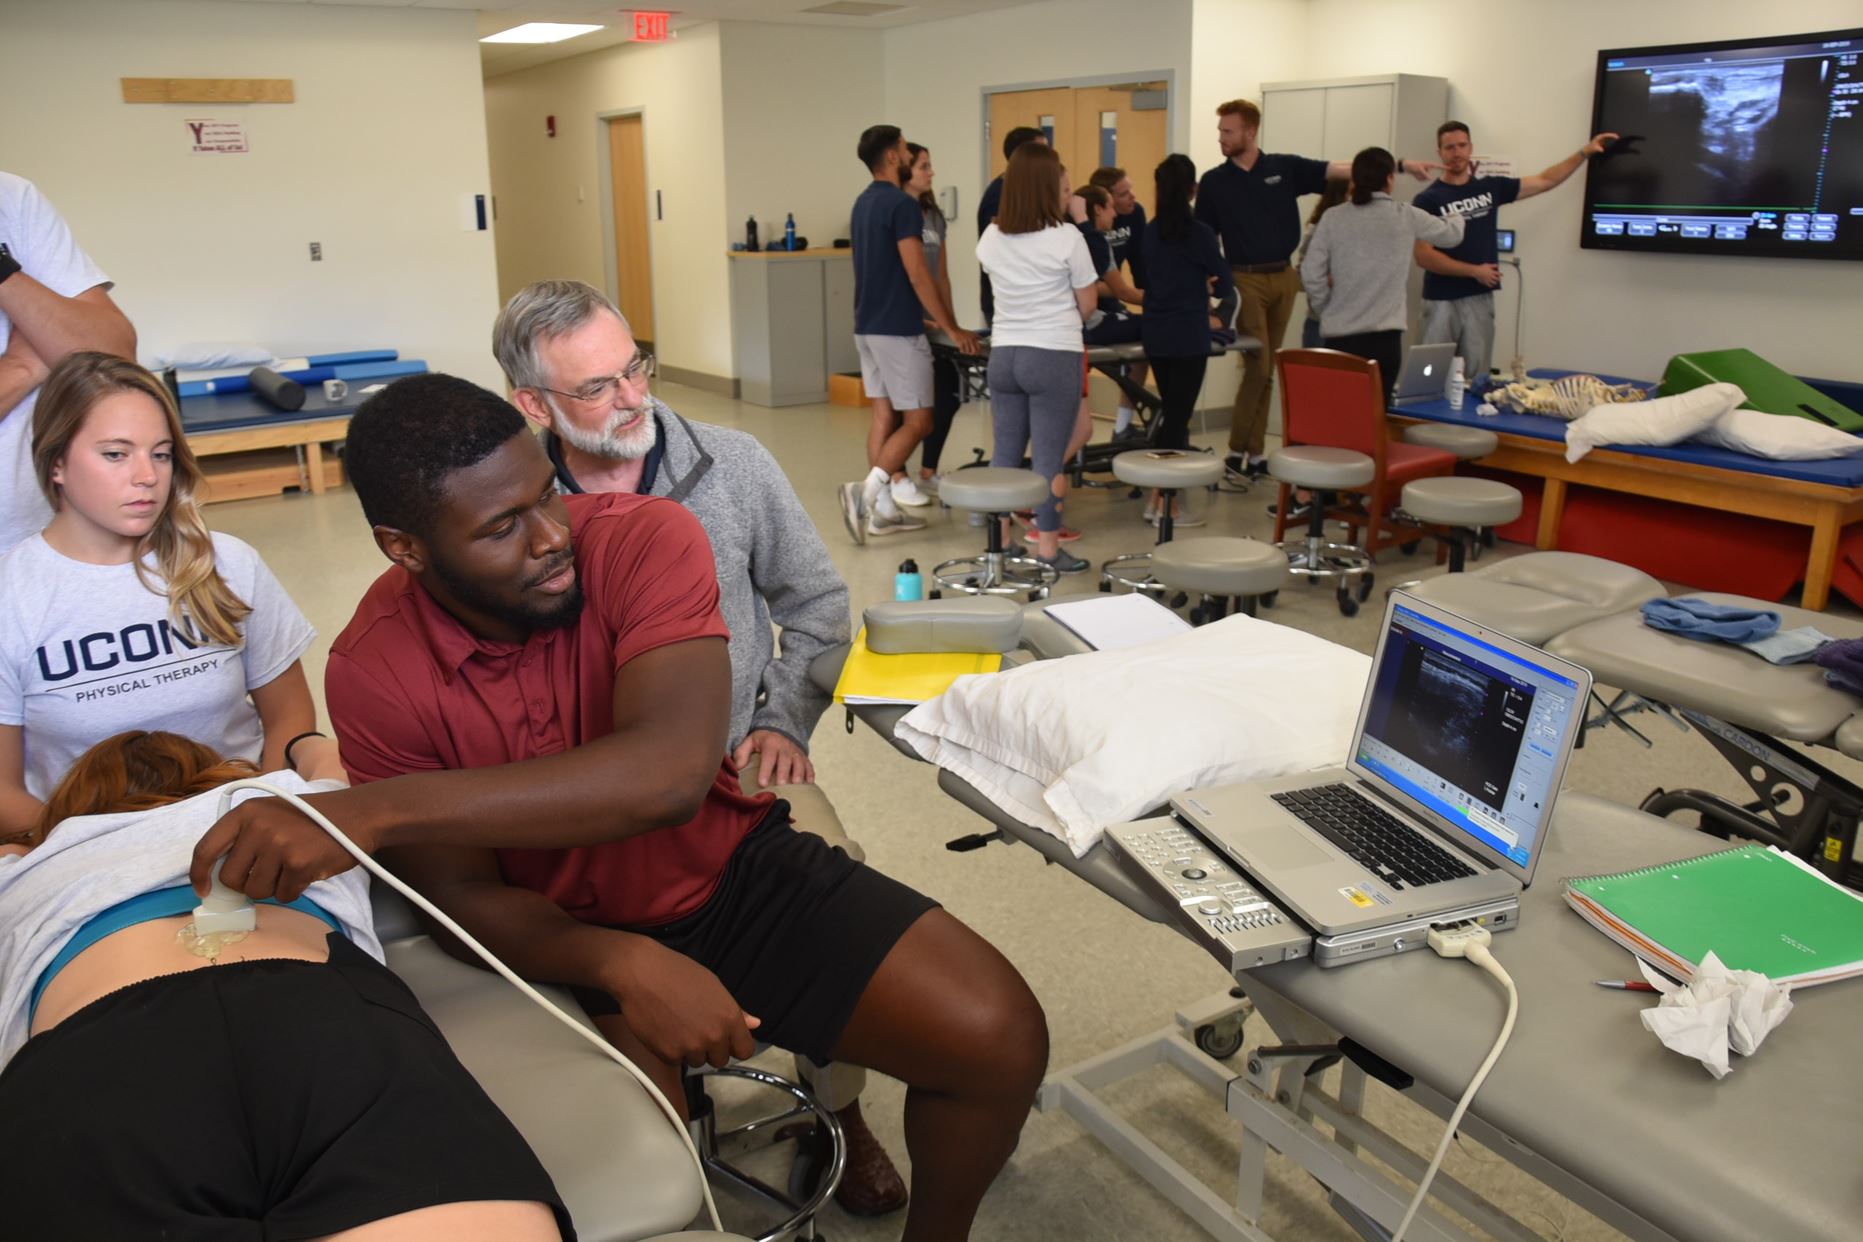 student practices an ultrasound on a classmate while faculty provide guidance